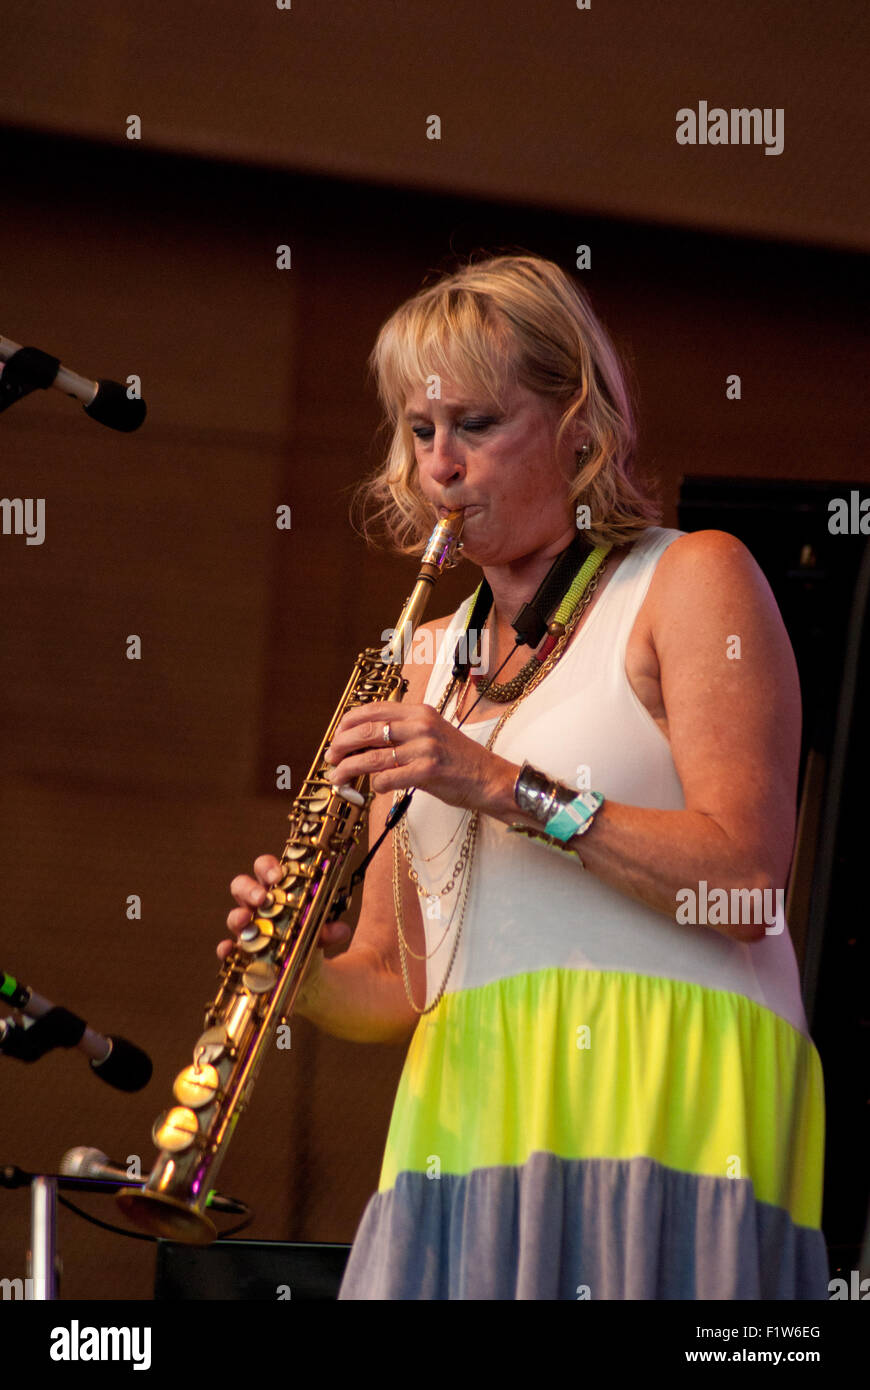 Chicago, Illinnois, USA. 6th Sep, 2015. Sunday, September 7, 2015, was the fourth and final day of the Chicago Jazz Festival. Music permeated Millennium Park in the heart of Chicago from noon until well into the night. At the Pritzker Pavillion, the evening performances featured Jane Burnett & Maqueque, all all female sextet, French singer Cyrille Aimée and the reunion of the Muhal Richard Abrams' Experimental Band. Pictured Jane Bunnett © Karen I. Hirsch/ZUMA Wire/Alamy Live News Stock Photo